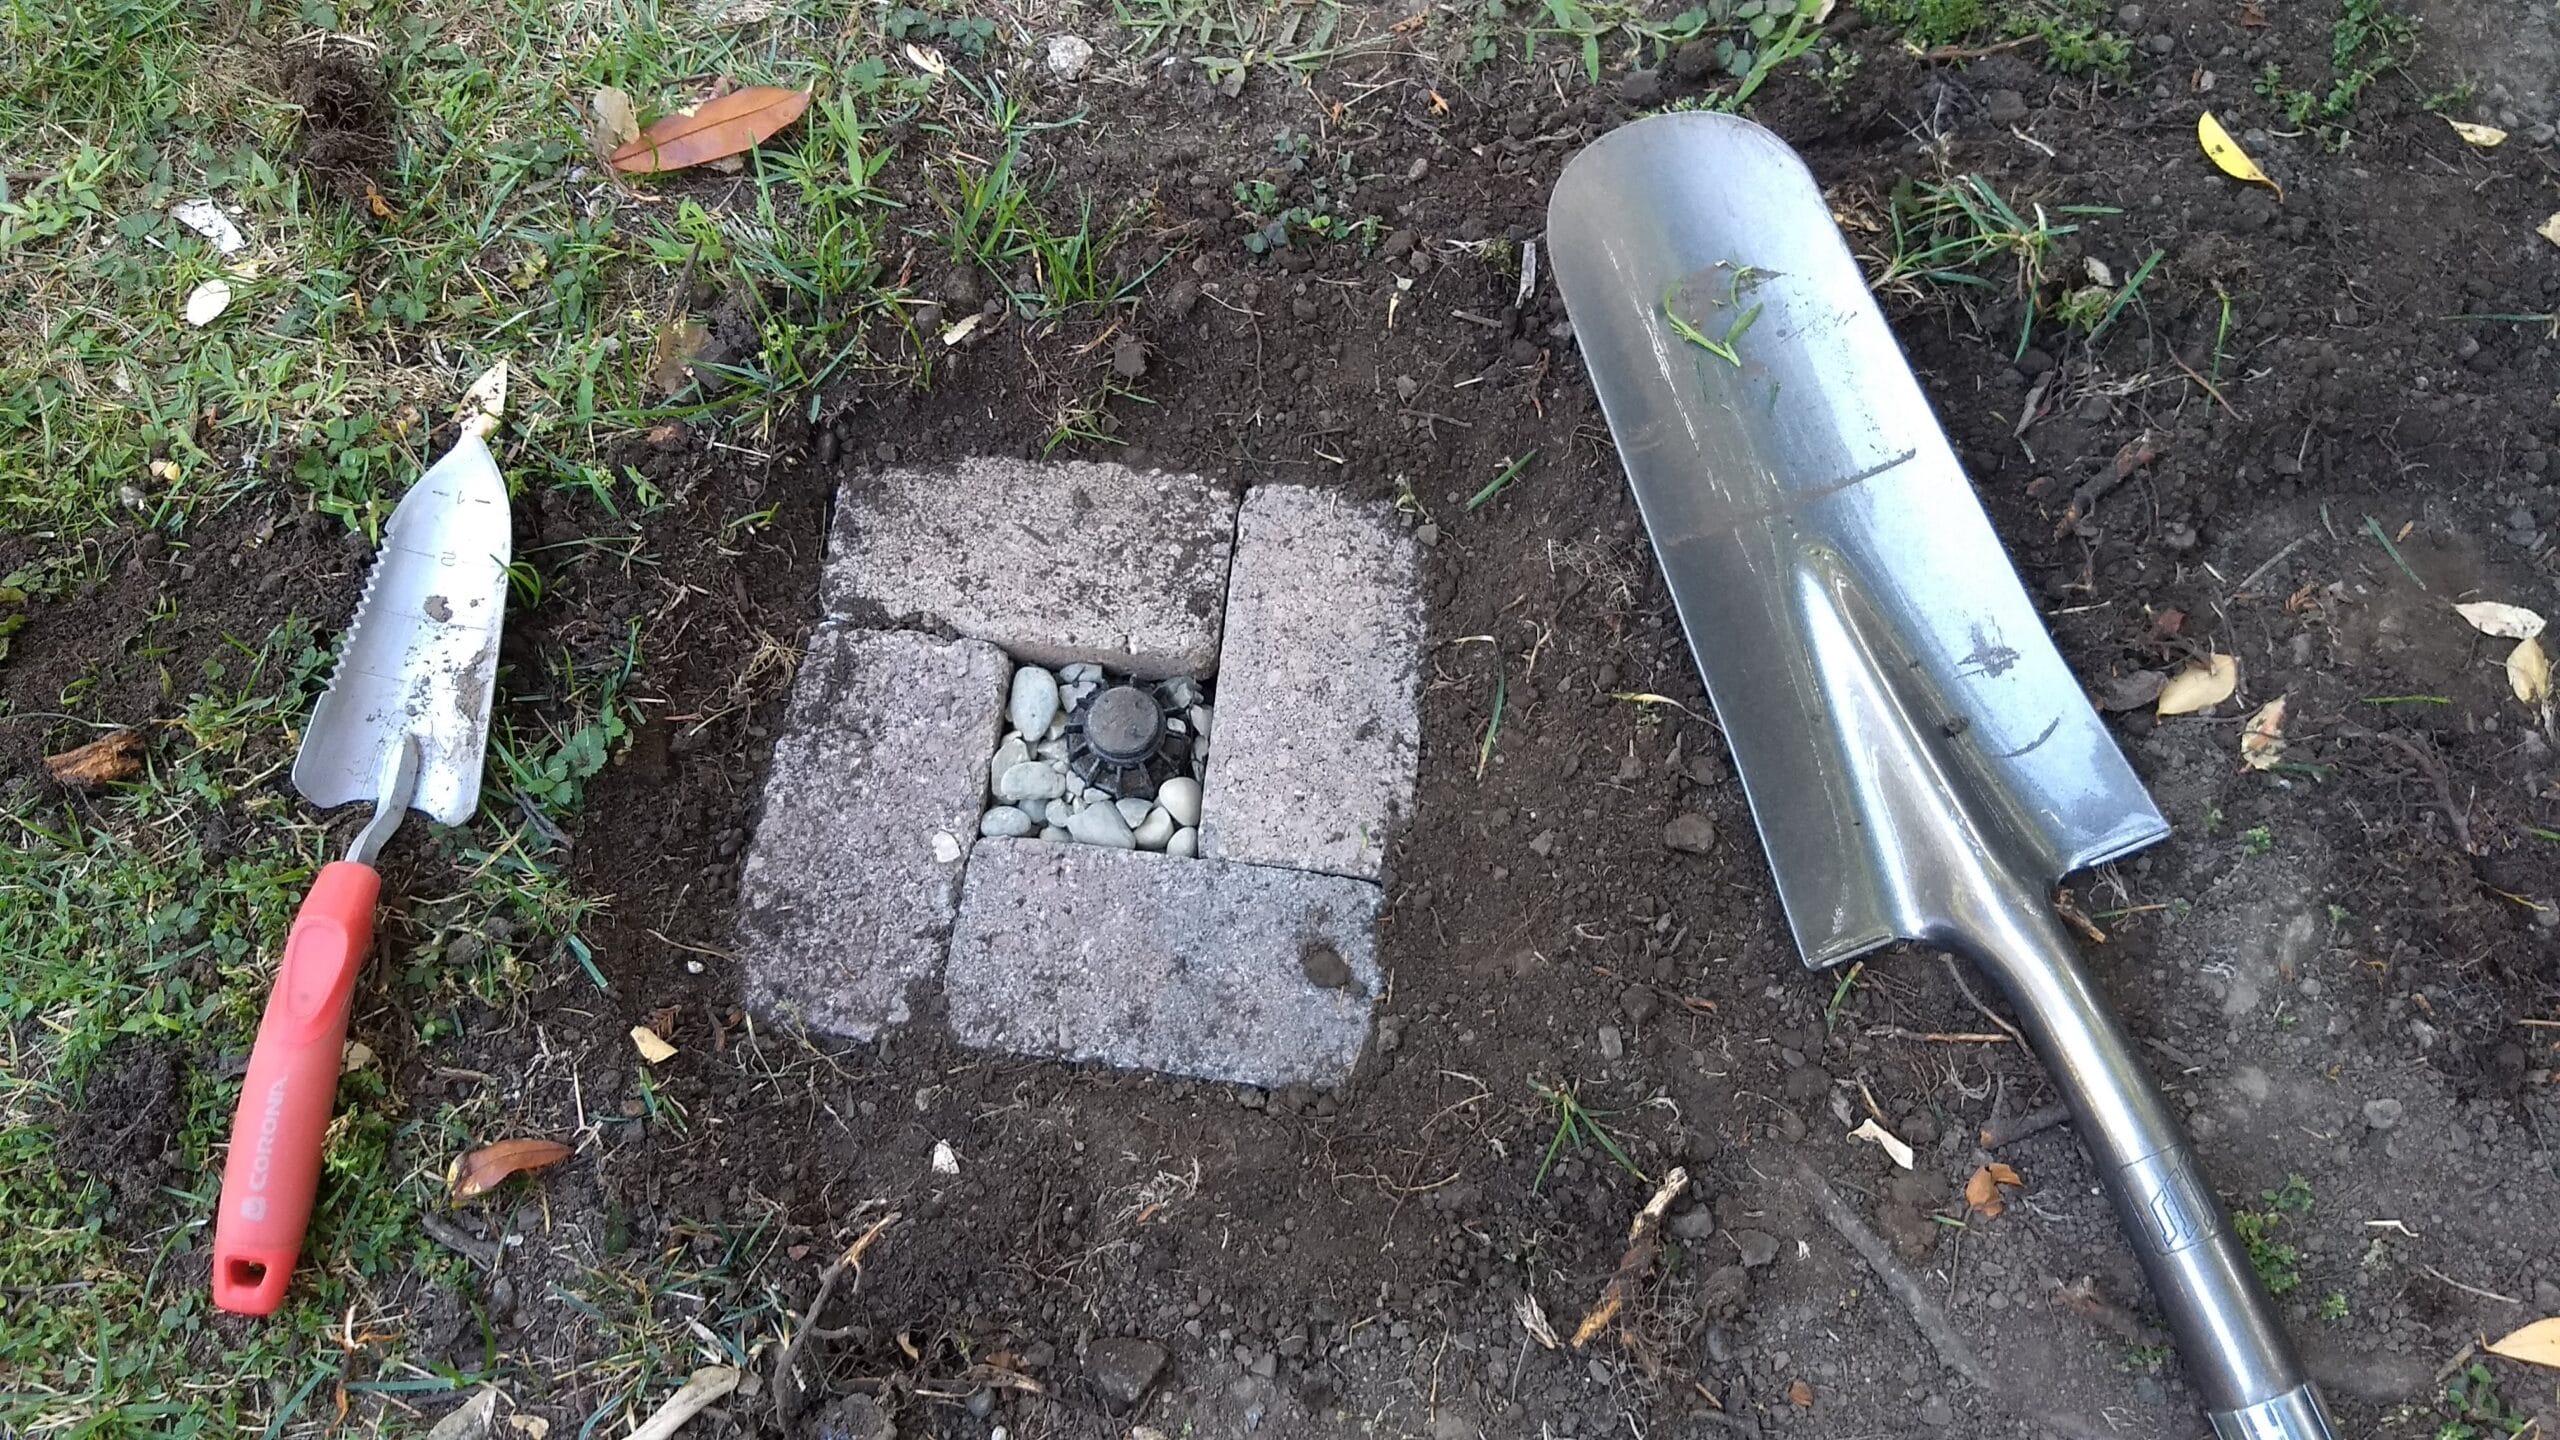 One of the hundreds of irrigation system repair jobs I’ve done this year. Here I installed a new rotor and built a little protective fort around it. Credit: Neal Gorenflo